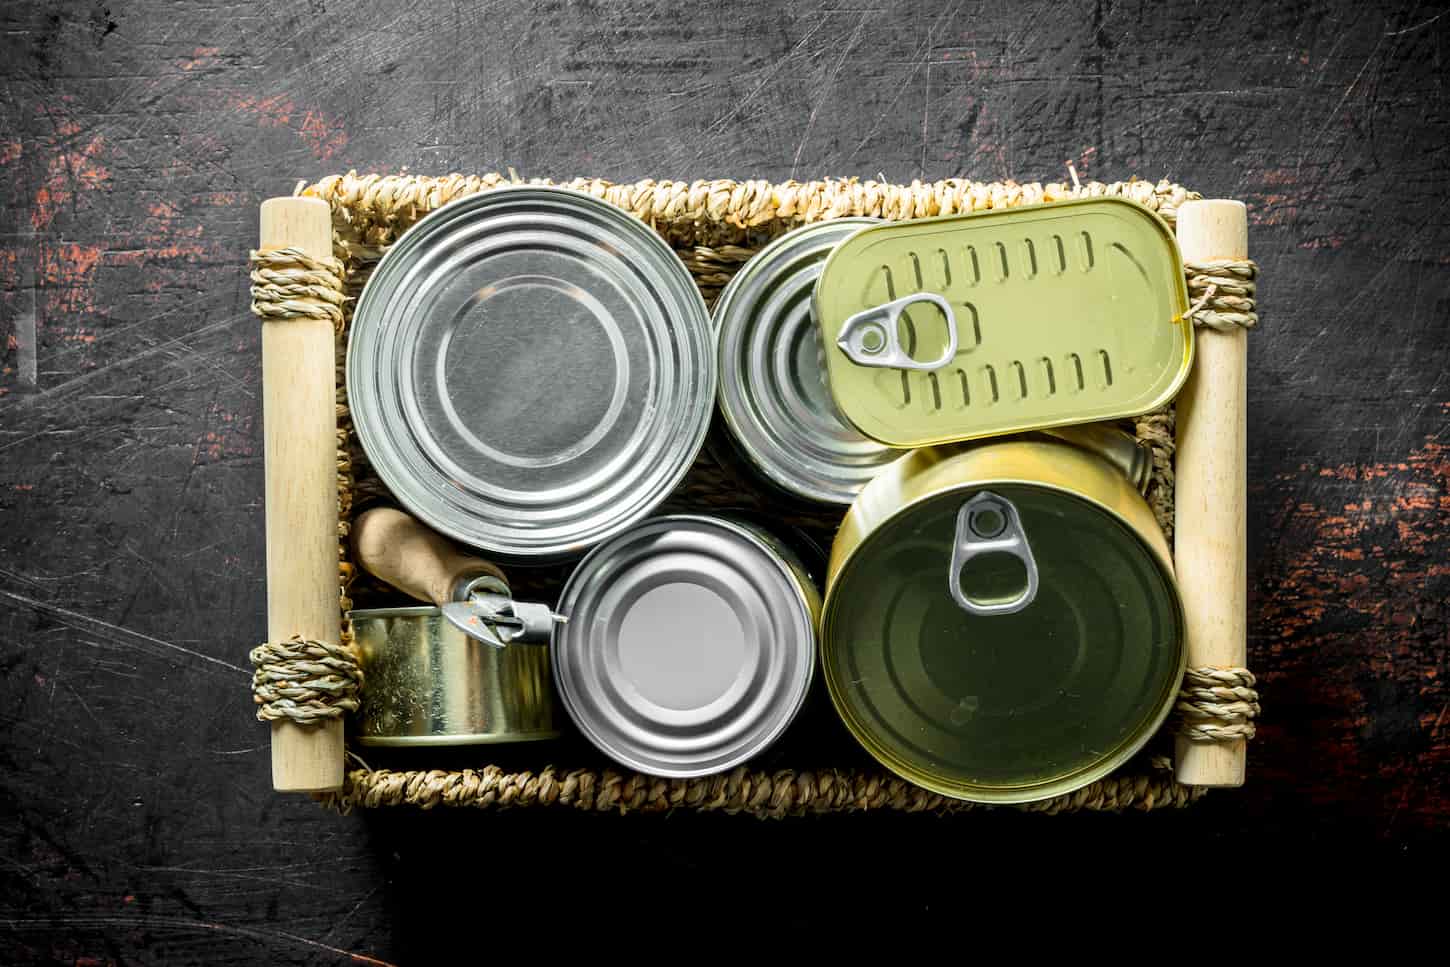 An image of Various closed cans on tray on a dark rustic background.